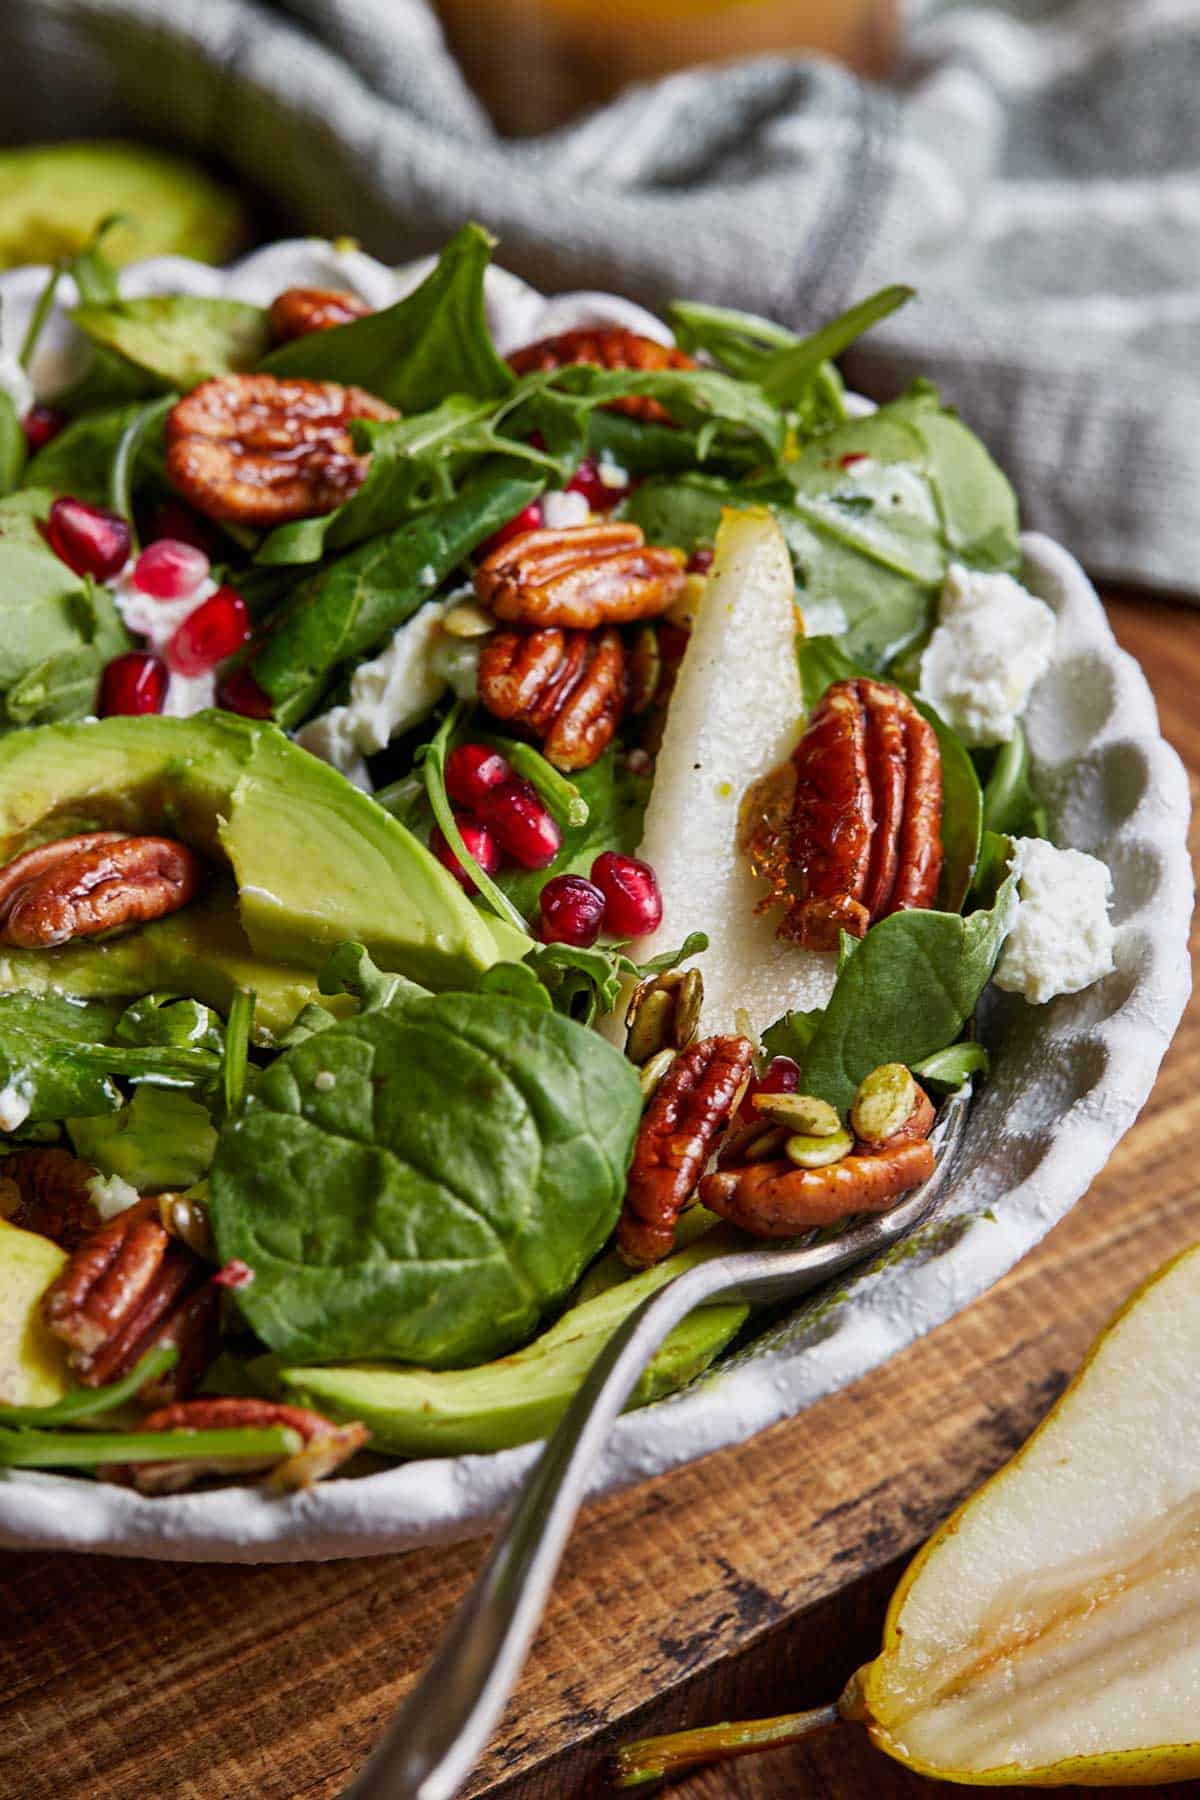 Pear and pomegranate salad with pecans and pomegranate vinaigrette.